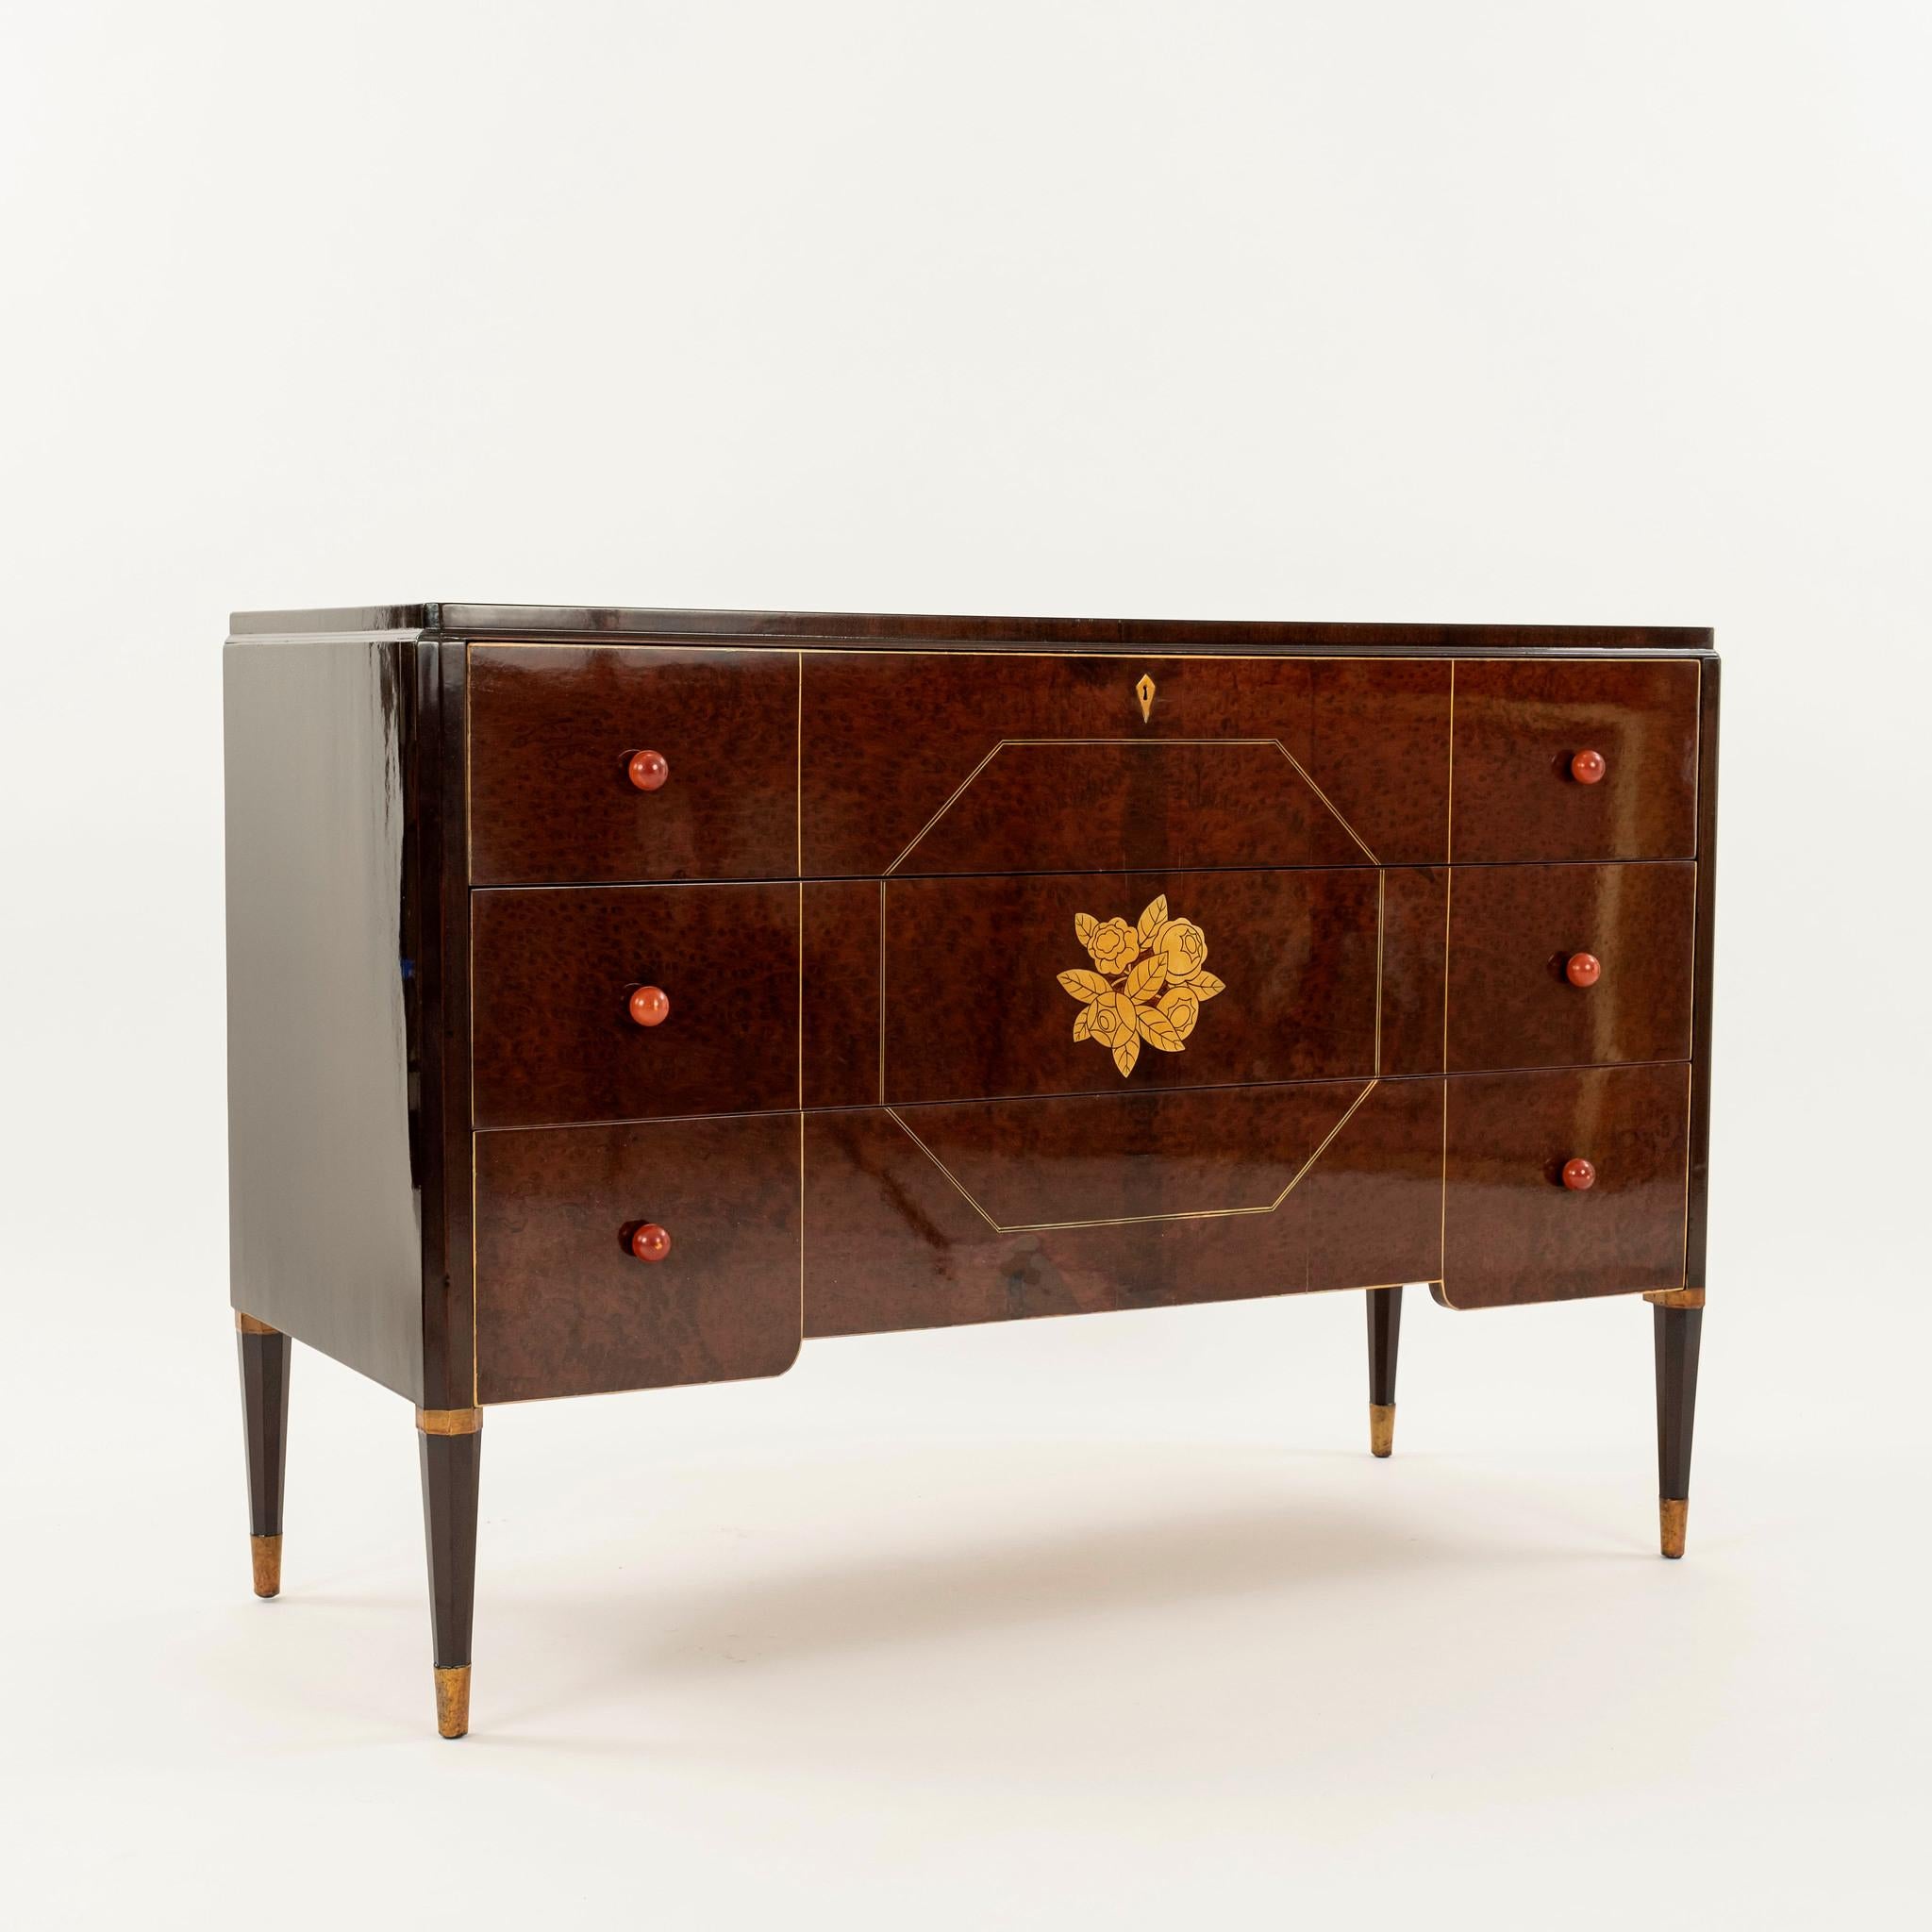 Lacquered Widdicomb three drawer burl walnut chest with brass inlay detail.